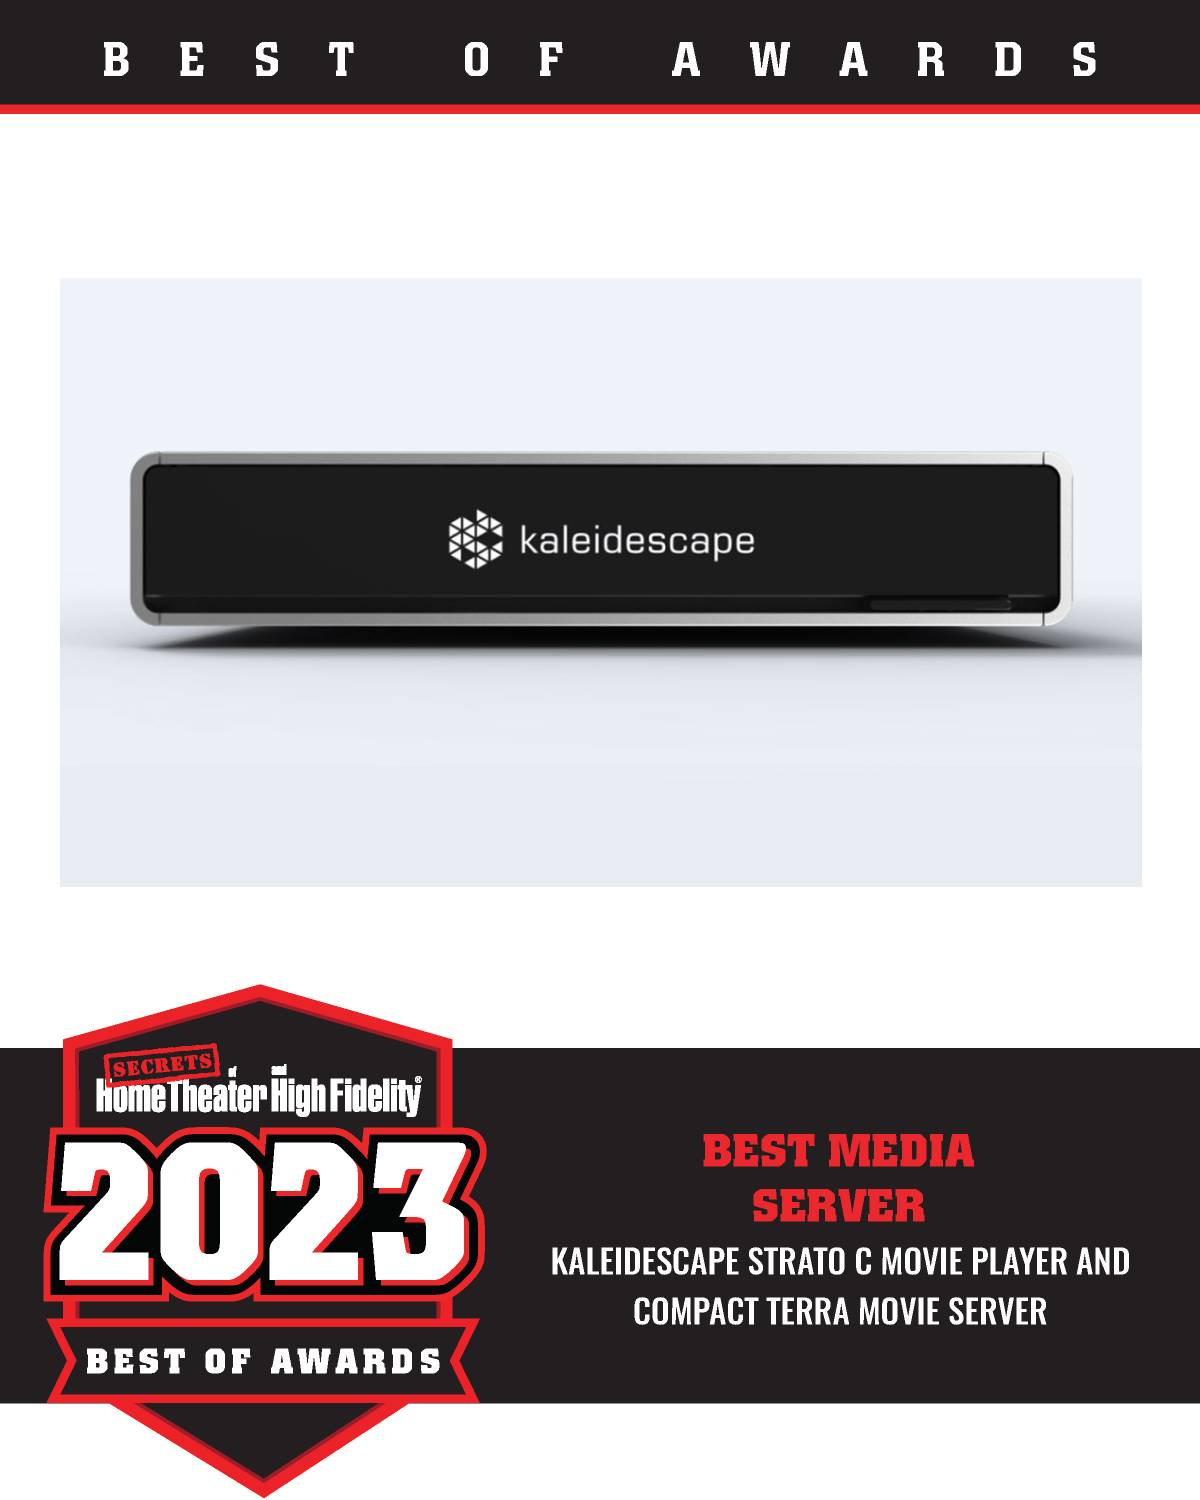 Kaleidescape Strato C Movie Player and Compact Terra Movie Server